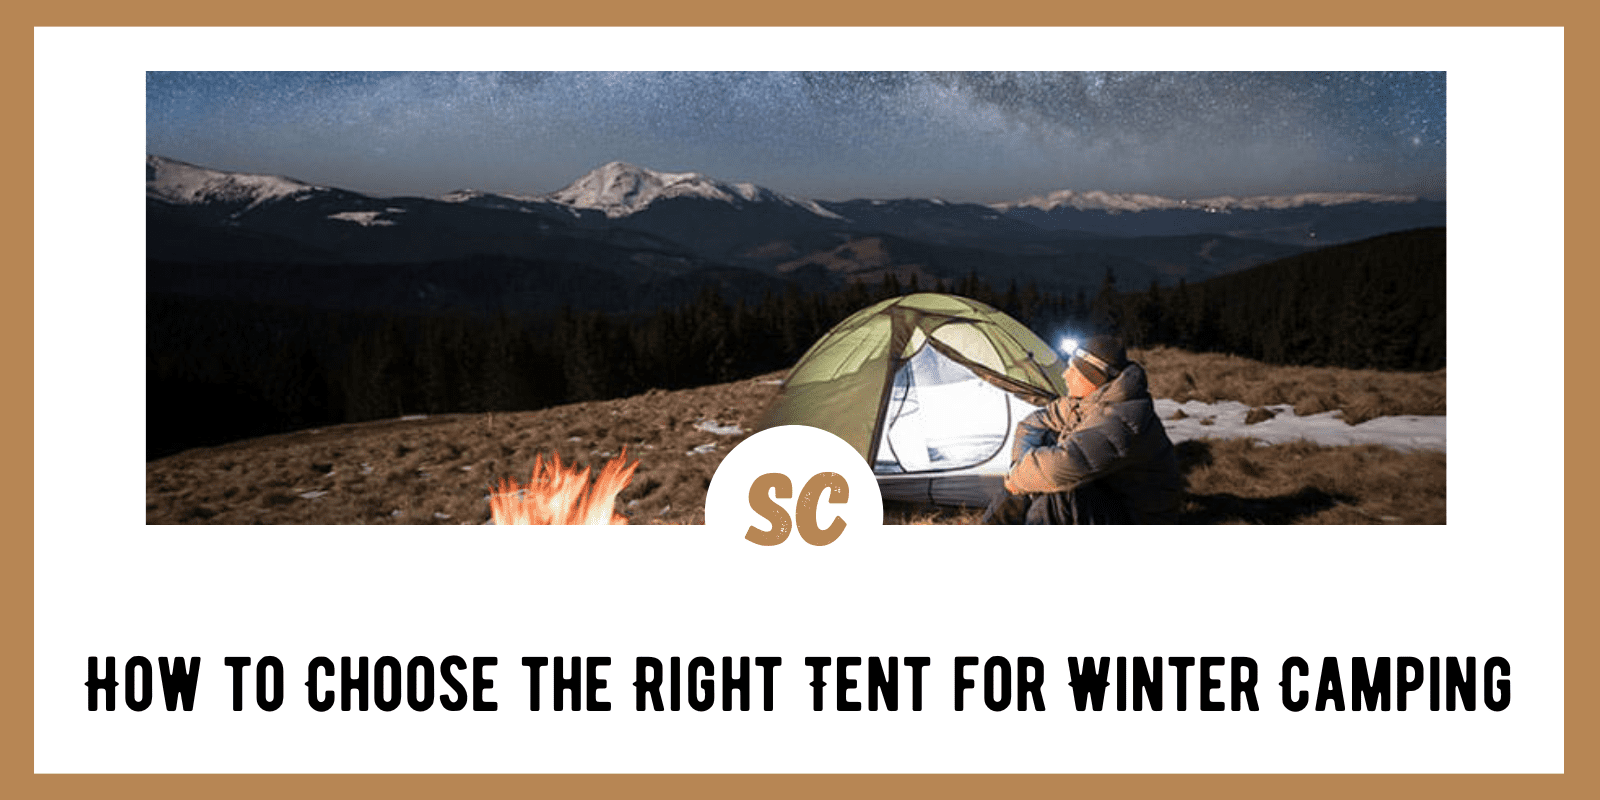 How to Choose the Right Tent for Winter Camping